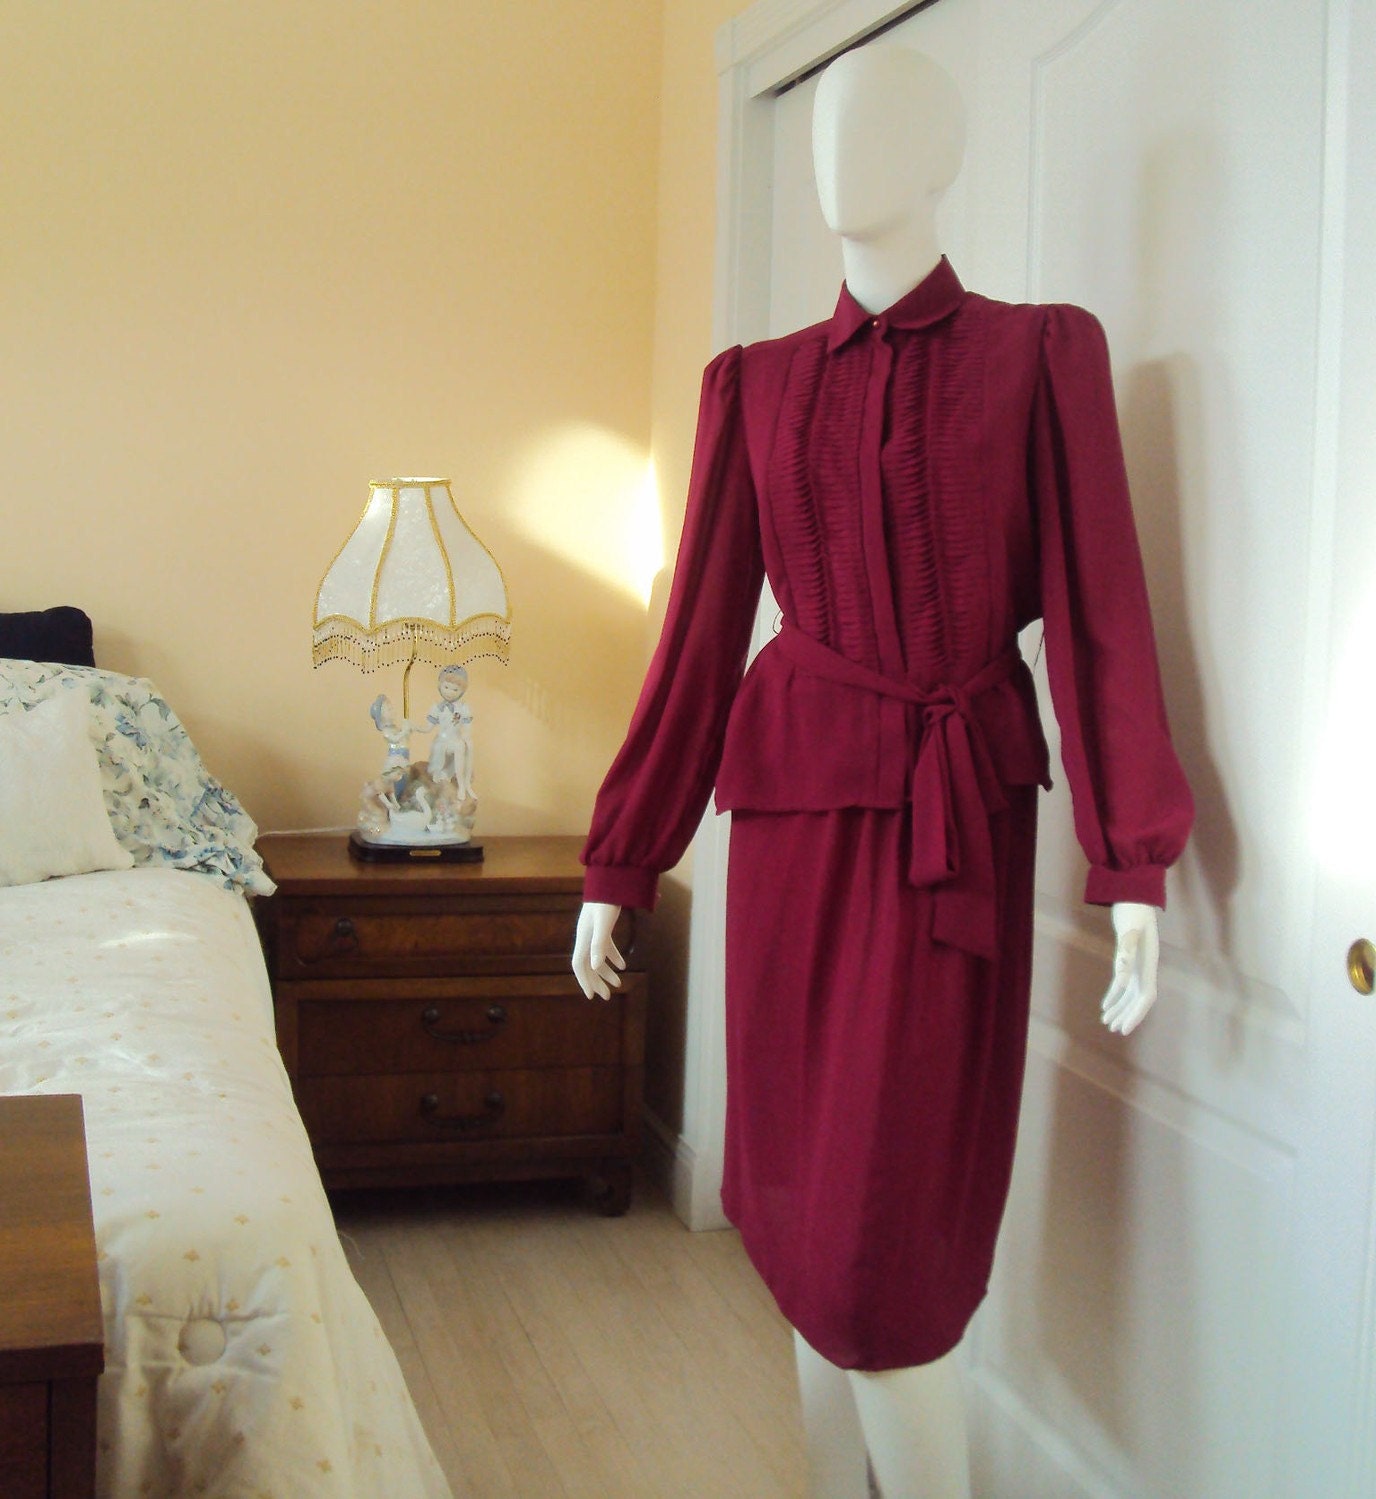 Vintage 70's Secretary Outfit, Women's Blouse and Skirt Set, Small Medium Size 7/8,  Fushia / Maroon / Pink - YesterdaysSilhouette